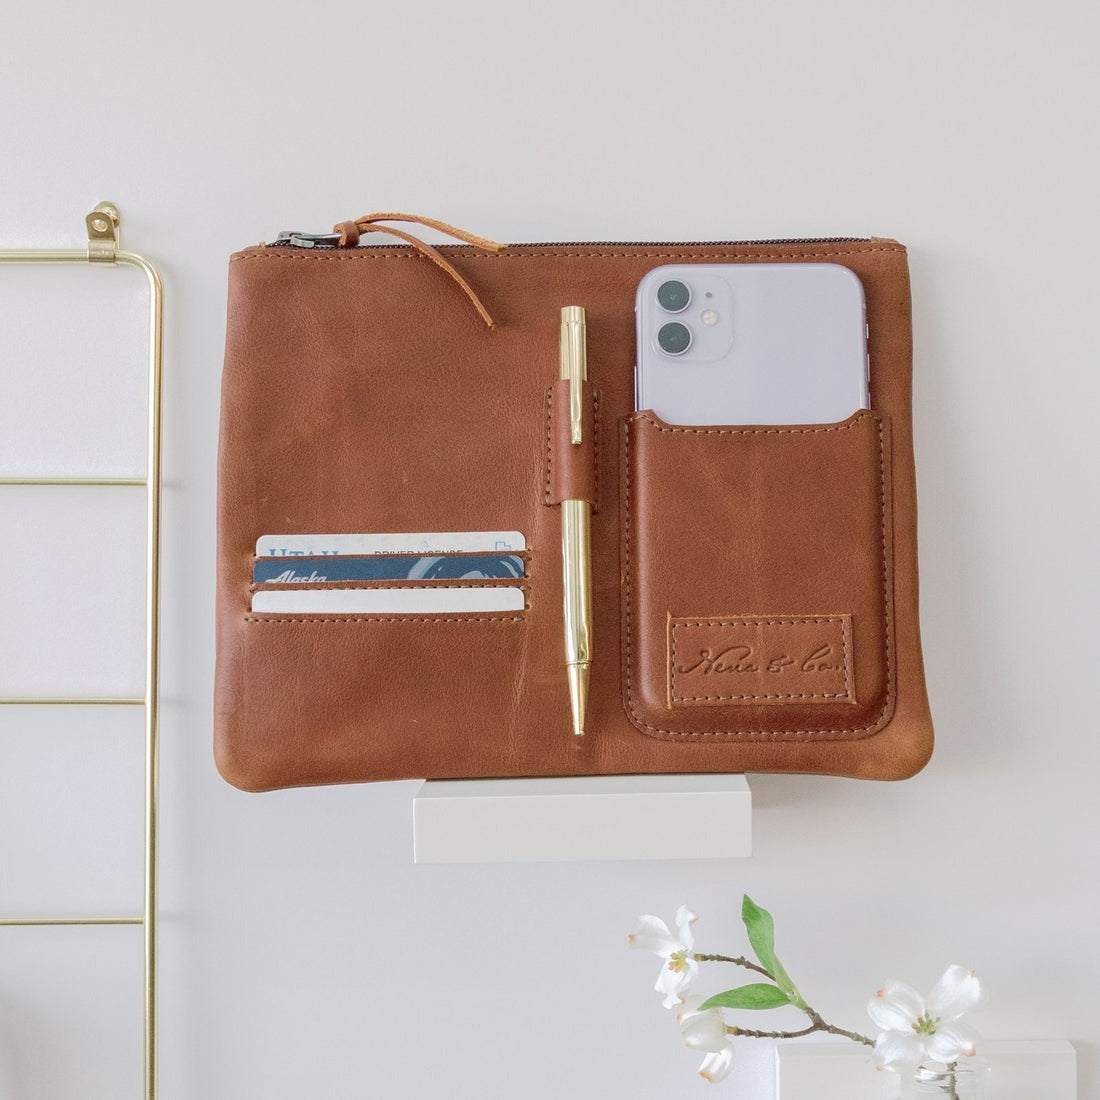 5 Nena Accessories To Help You Stay Organized in 2022